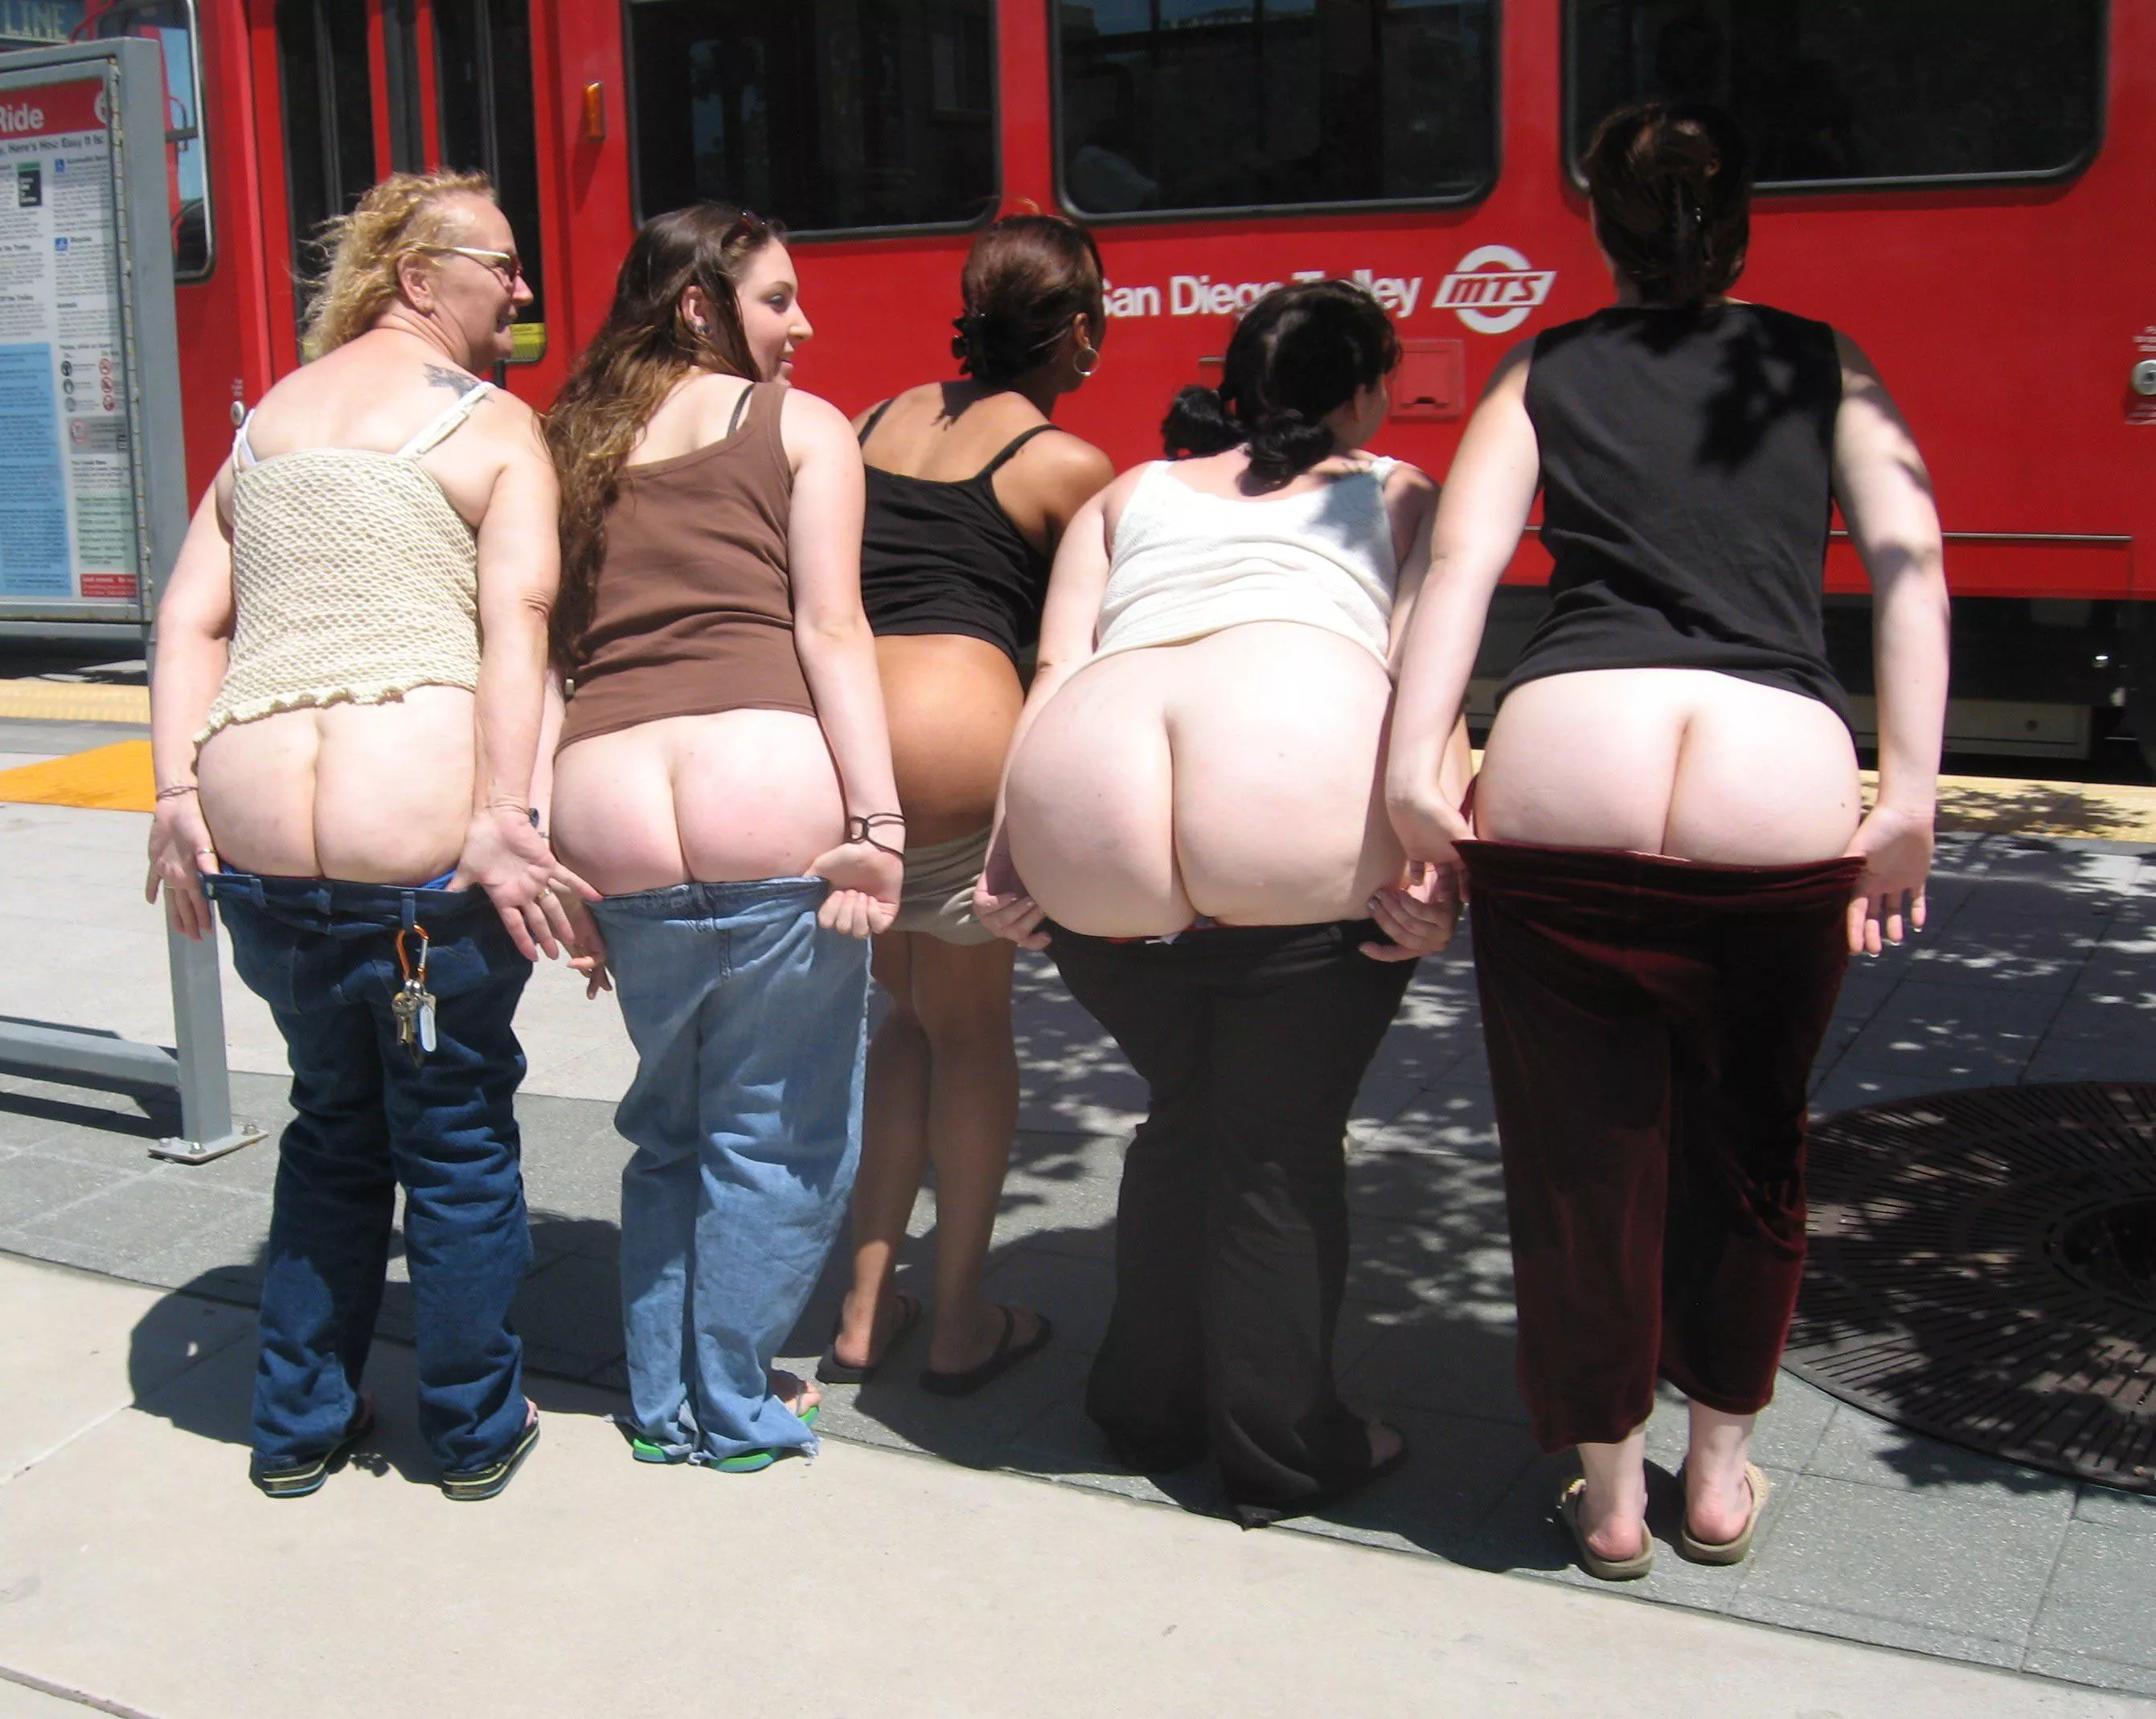 Big group of friends mooning next to train nudes Mooning NUDE-PICS